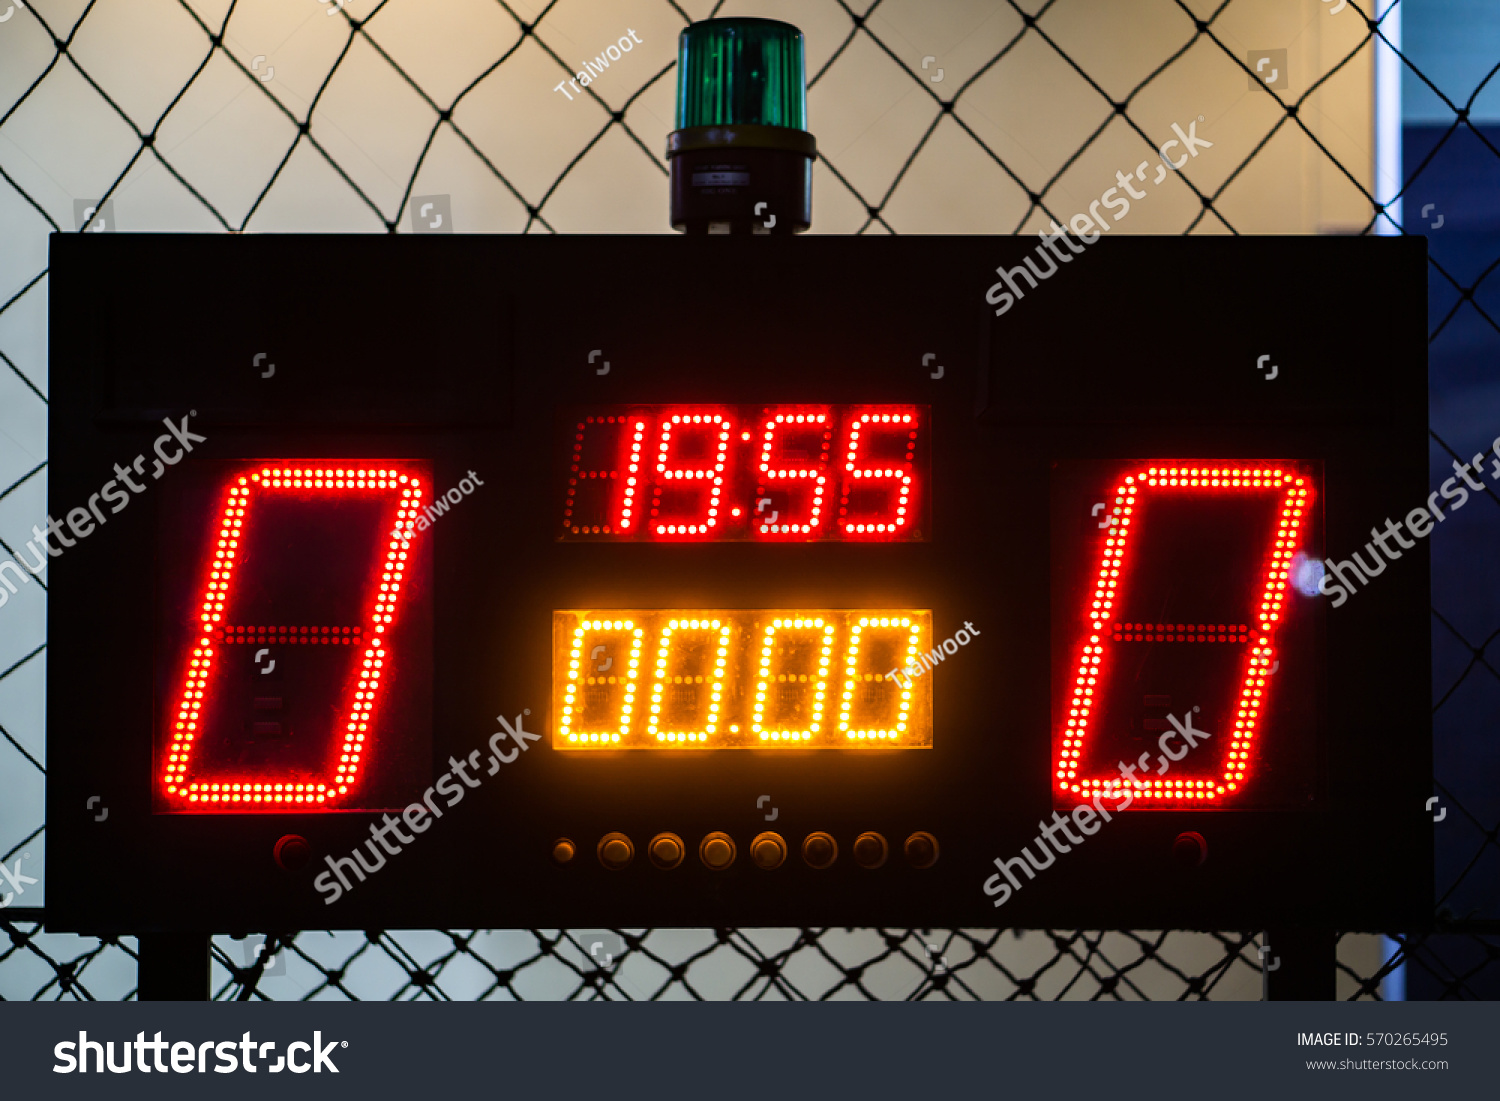 LED Score Board Panel in the Indoor Soccer Field at the Night Time #570265495